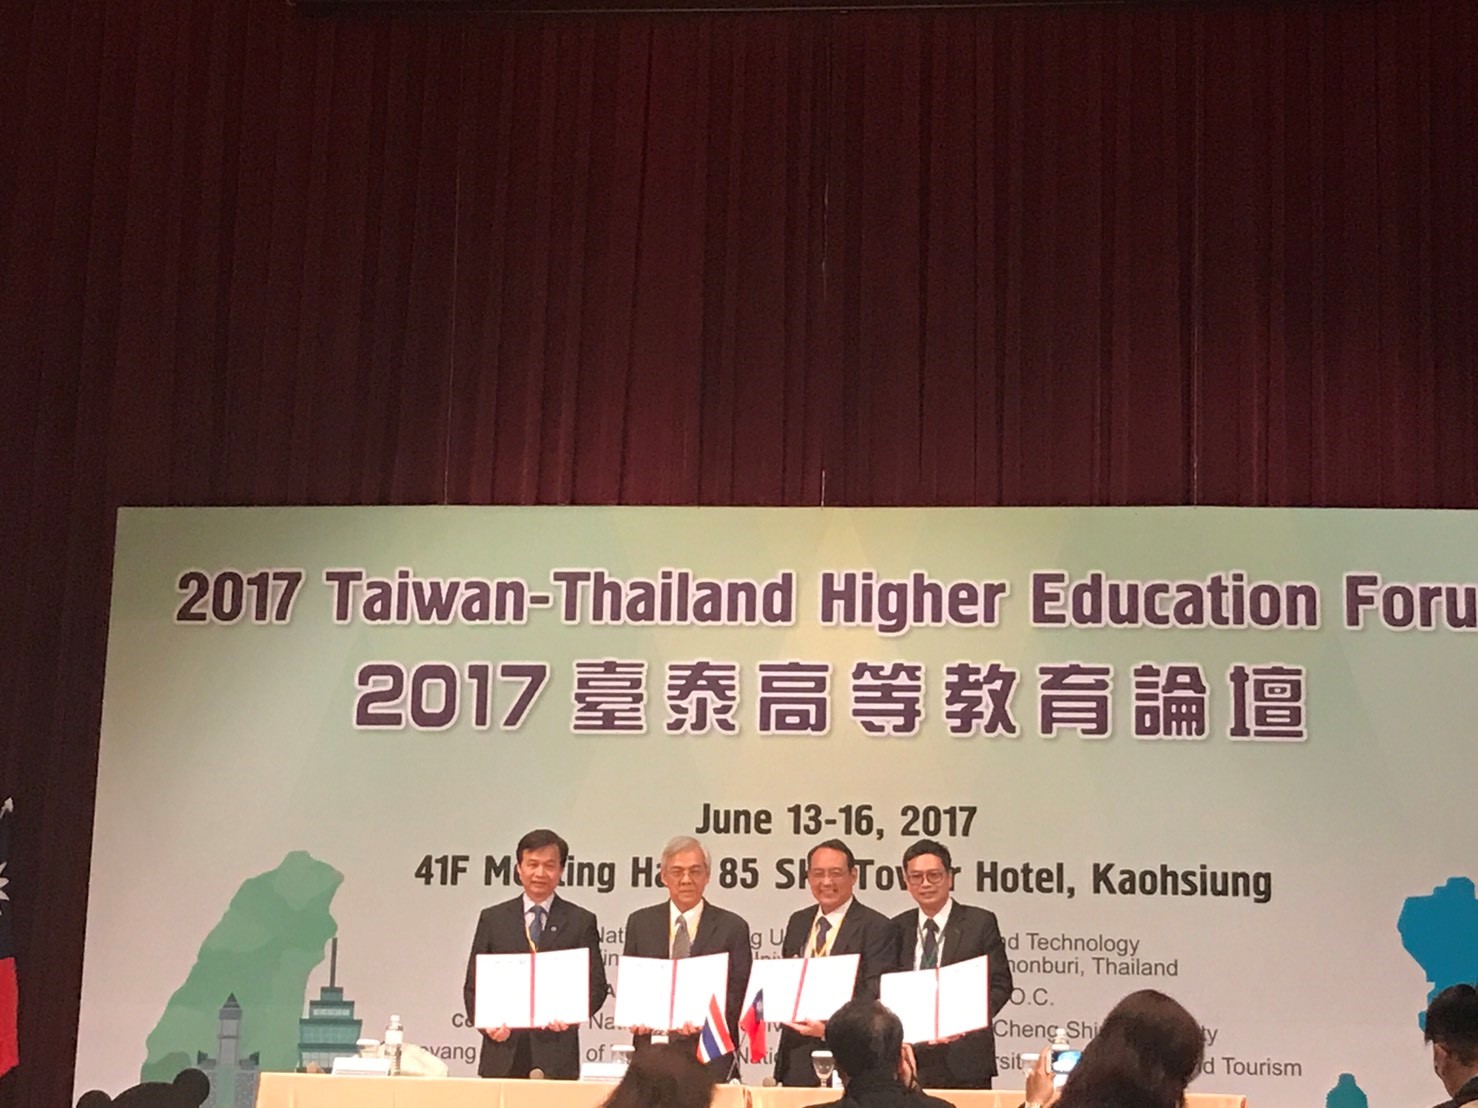 The Sixth Taiwan-Thailand Higher Education Forum held in Kaohsiung, Taiwan June 13–16, 2017